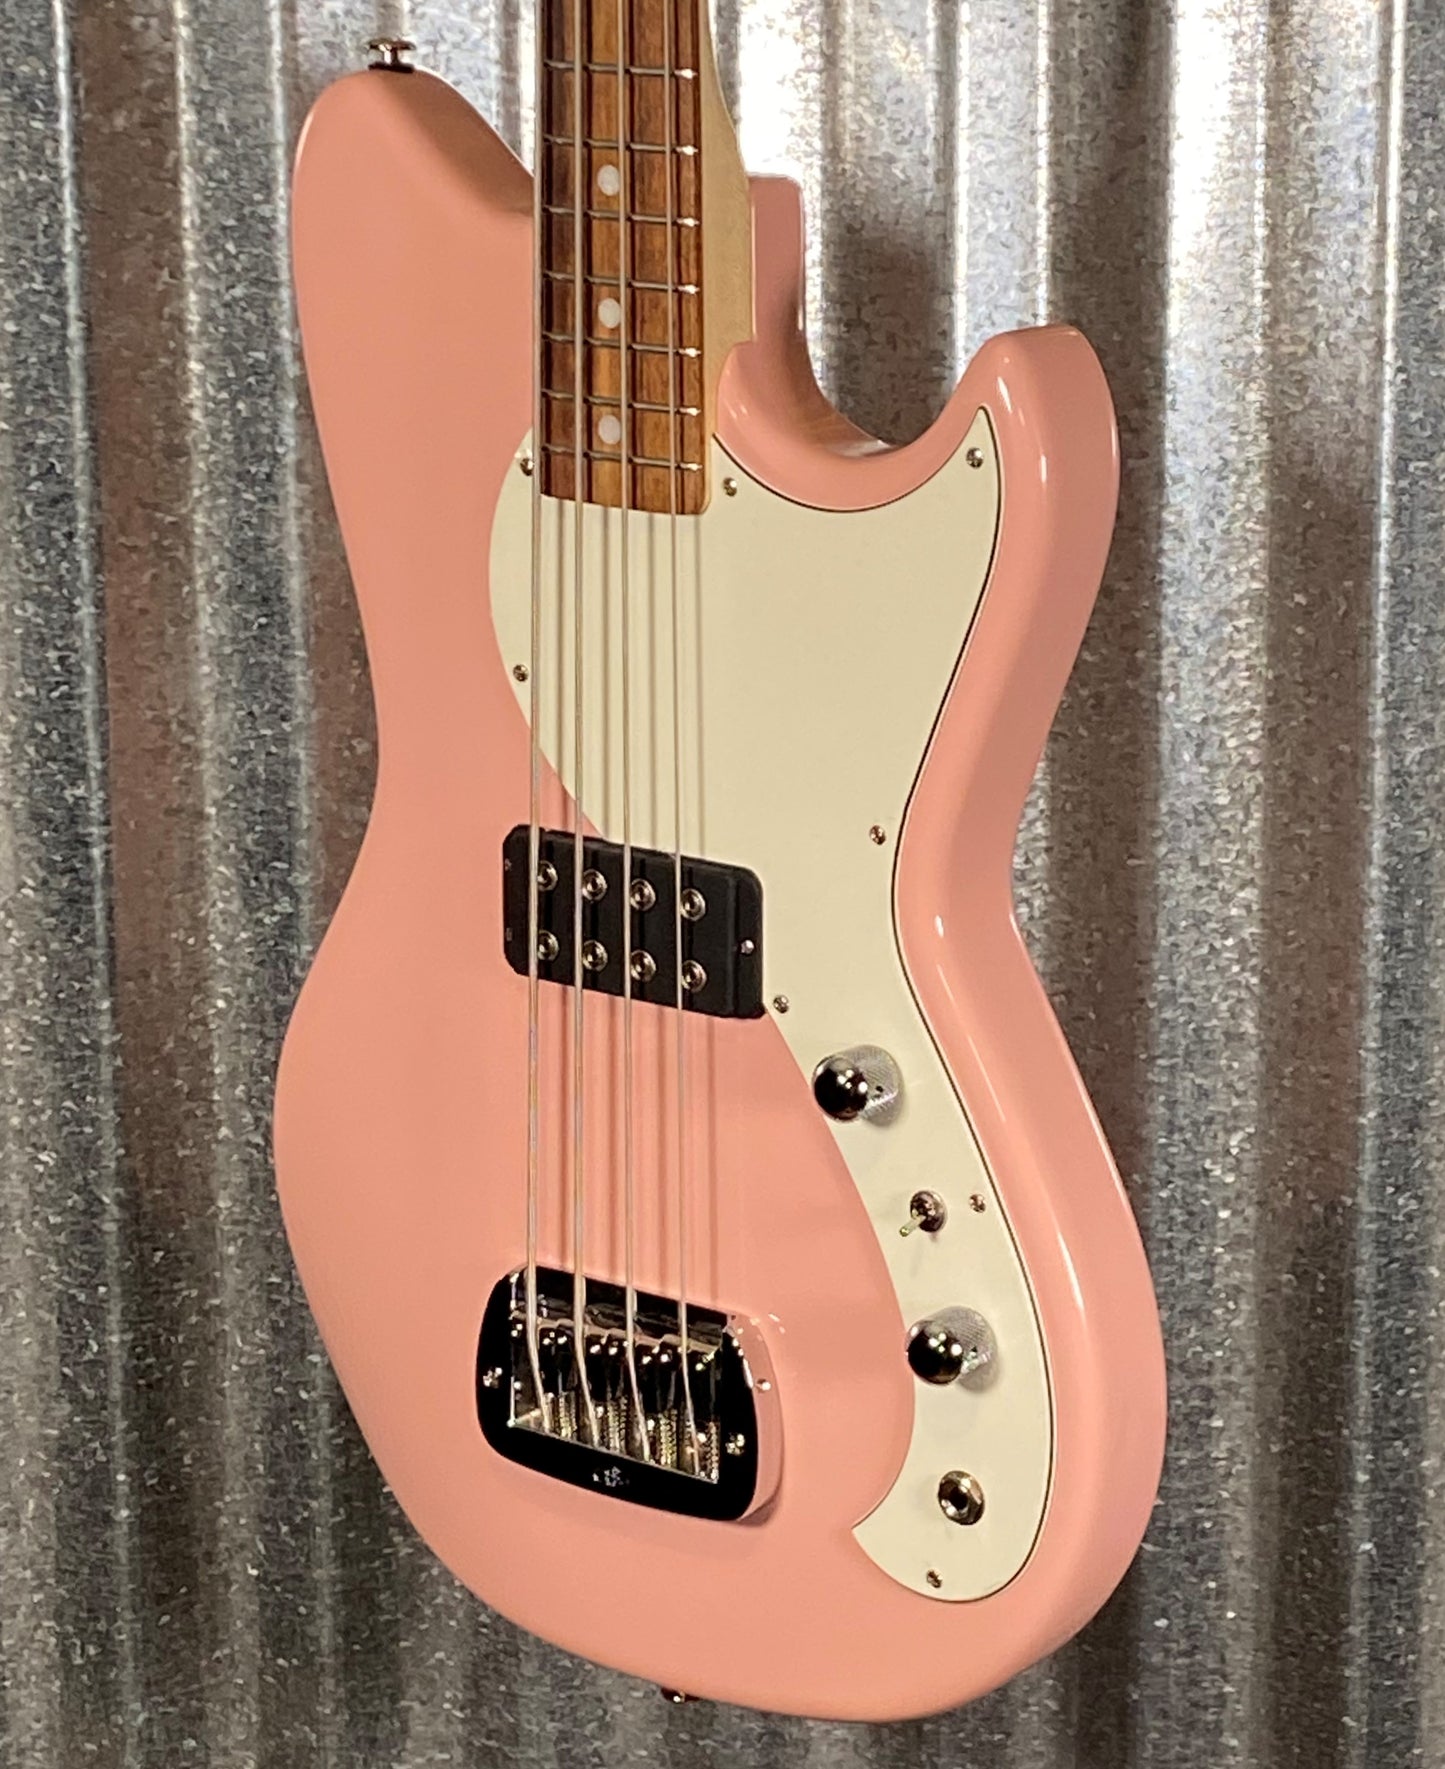 G&L USA Fallout Bass Shell Pink 4 String Short Scale Bass & Bag #6179 Used